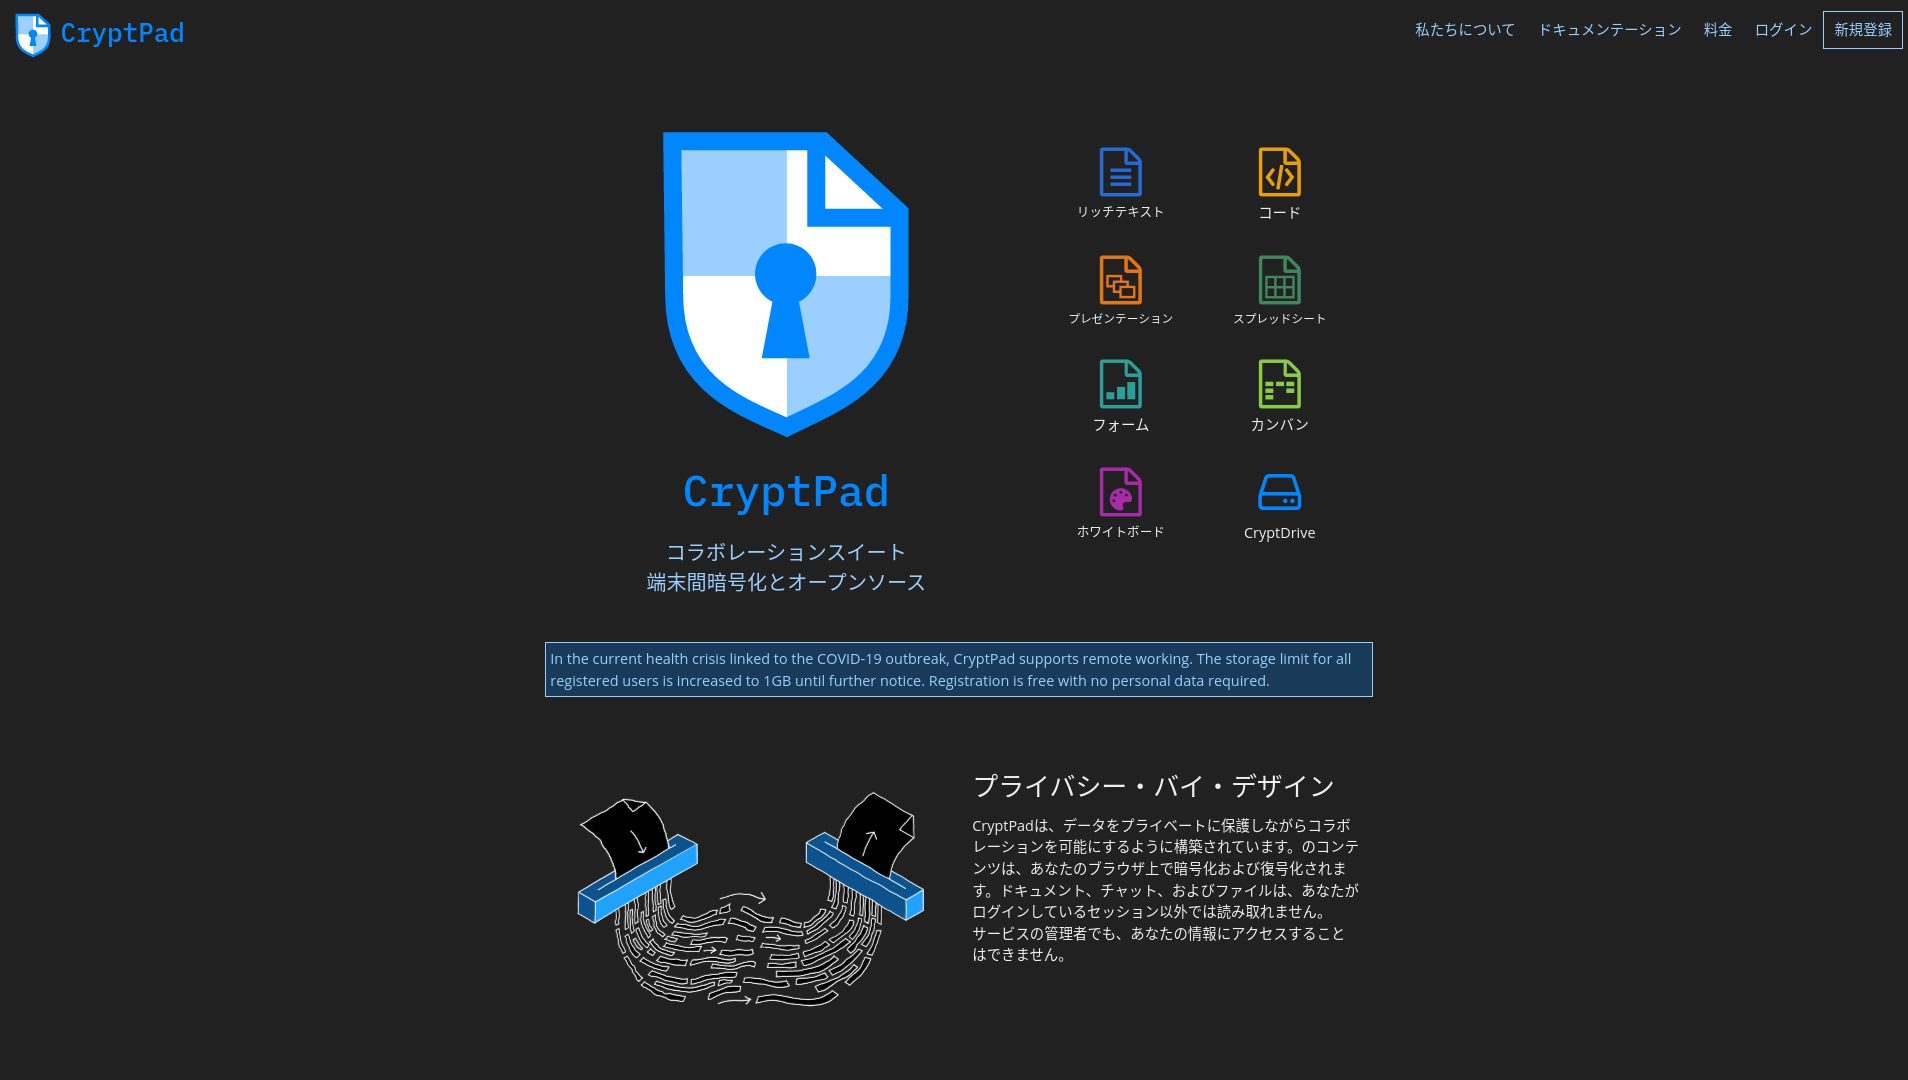 CryptPad's home page in Japanese